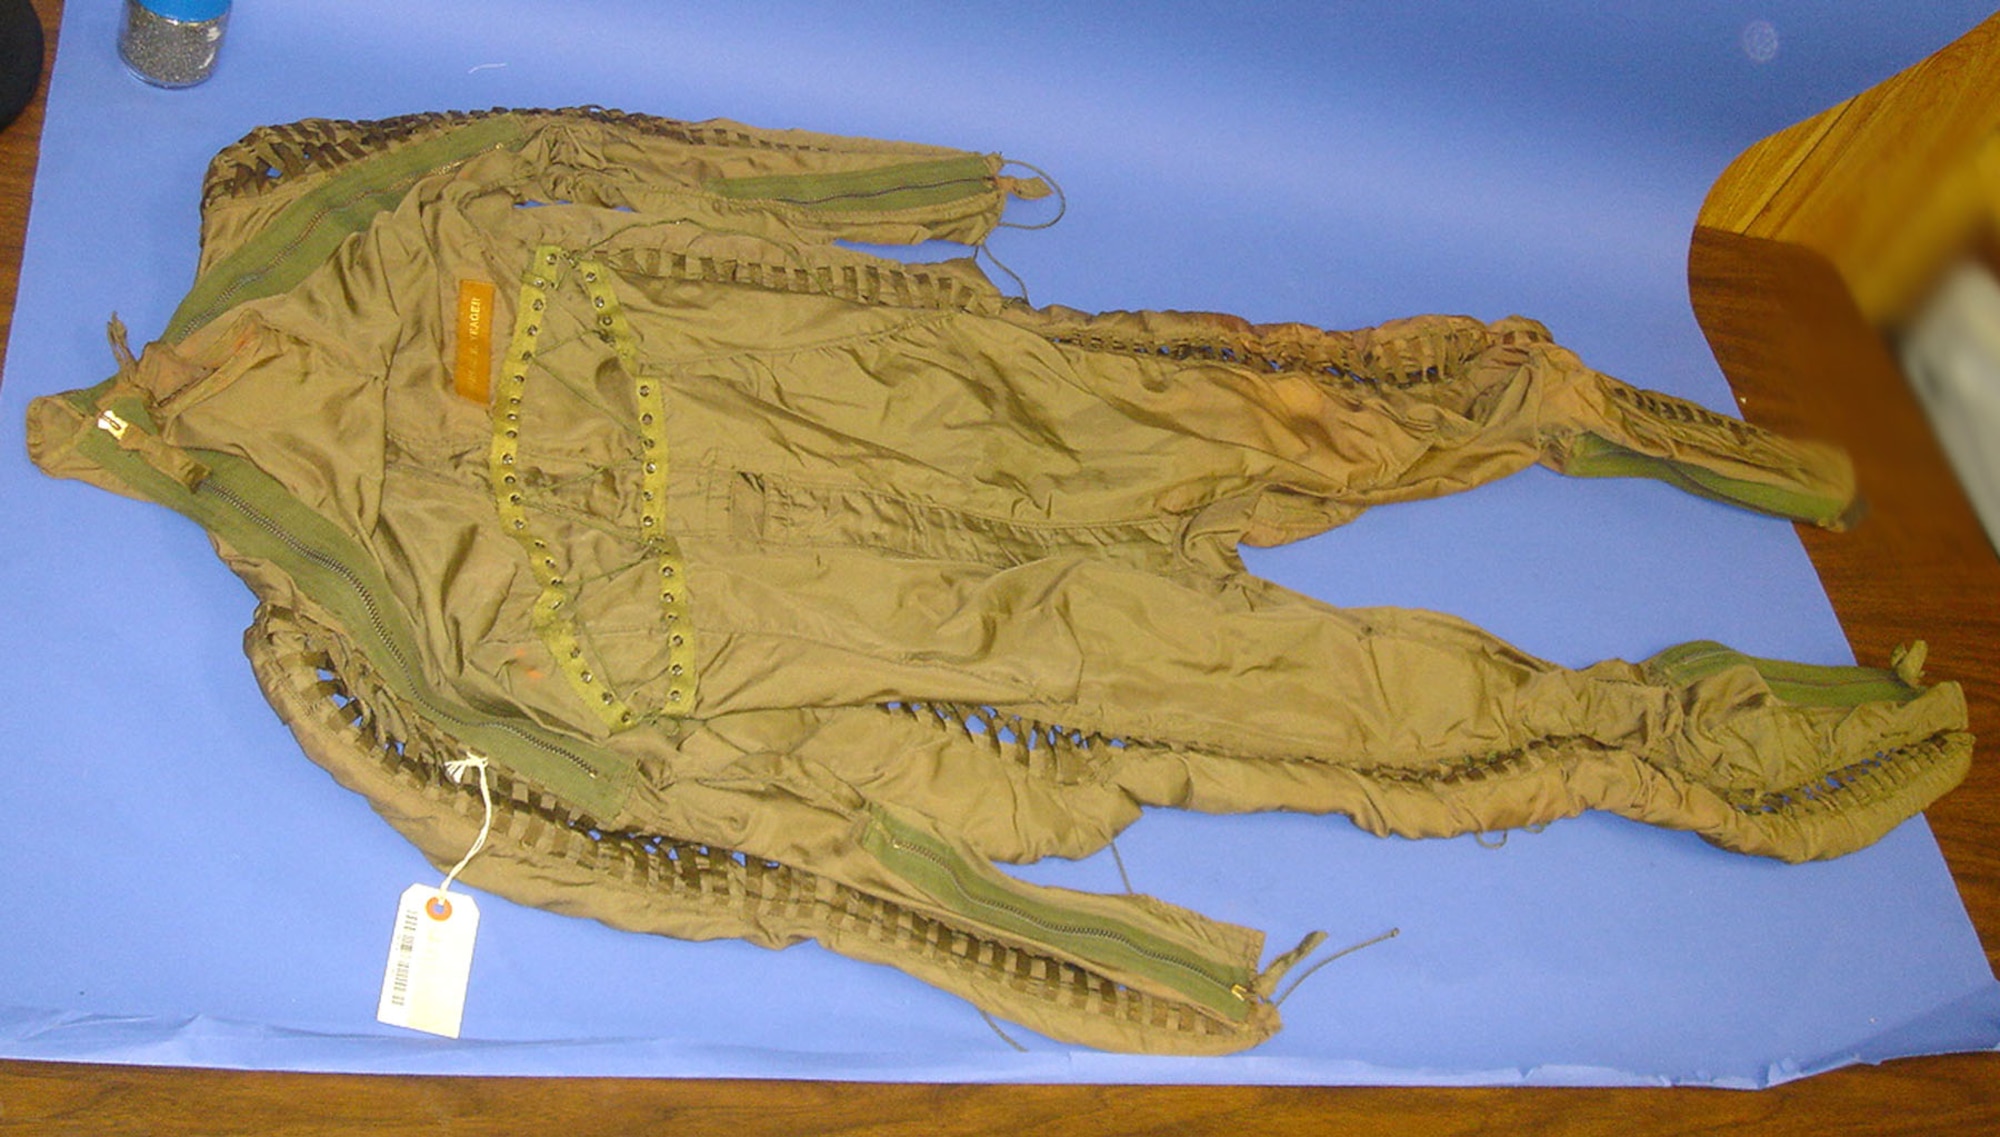 This flying suit was worn by Chuck Yeager during his X-1 flight tests in 1947. (U.S. Air Force photo)